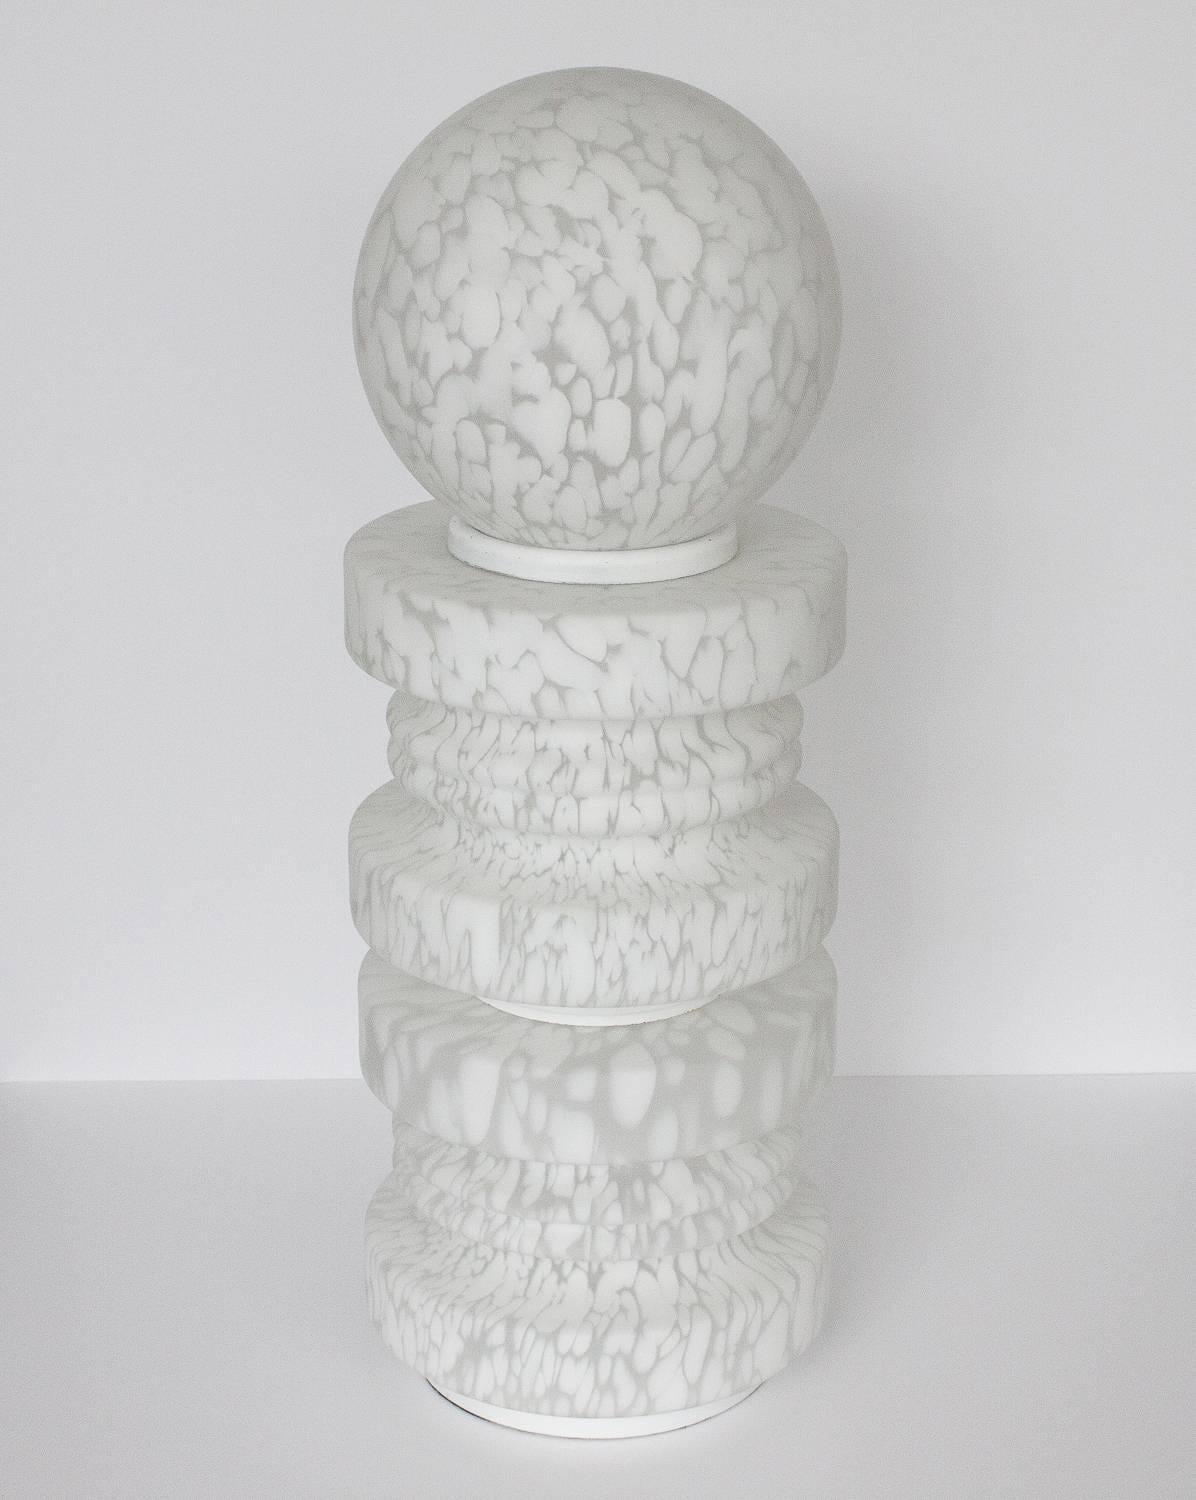 Monumental TOTEM lamp in speckled white and clear frosted / satin Murano glass by Vistosi. Three separate glass segments are separated by white enameled metal spacers. Suitable for floor or table. The lamp takes one standard base light bulb in the